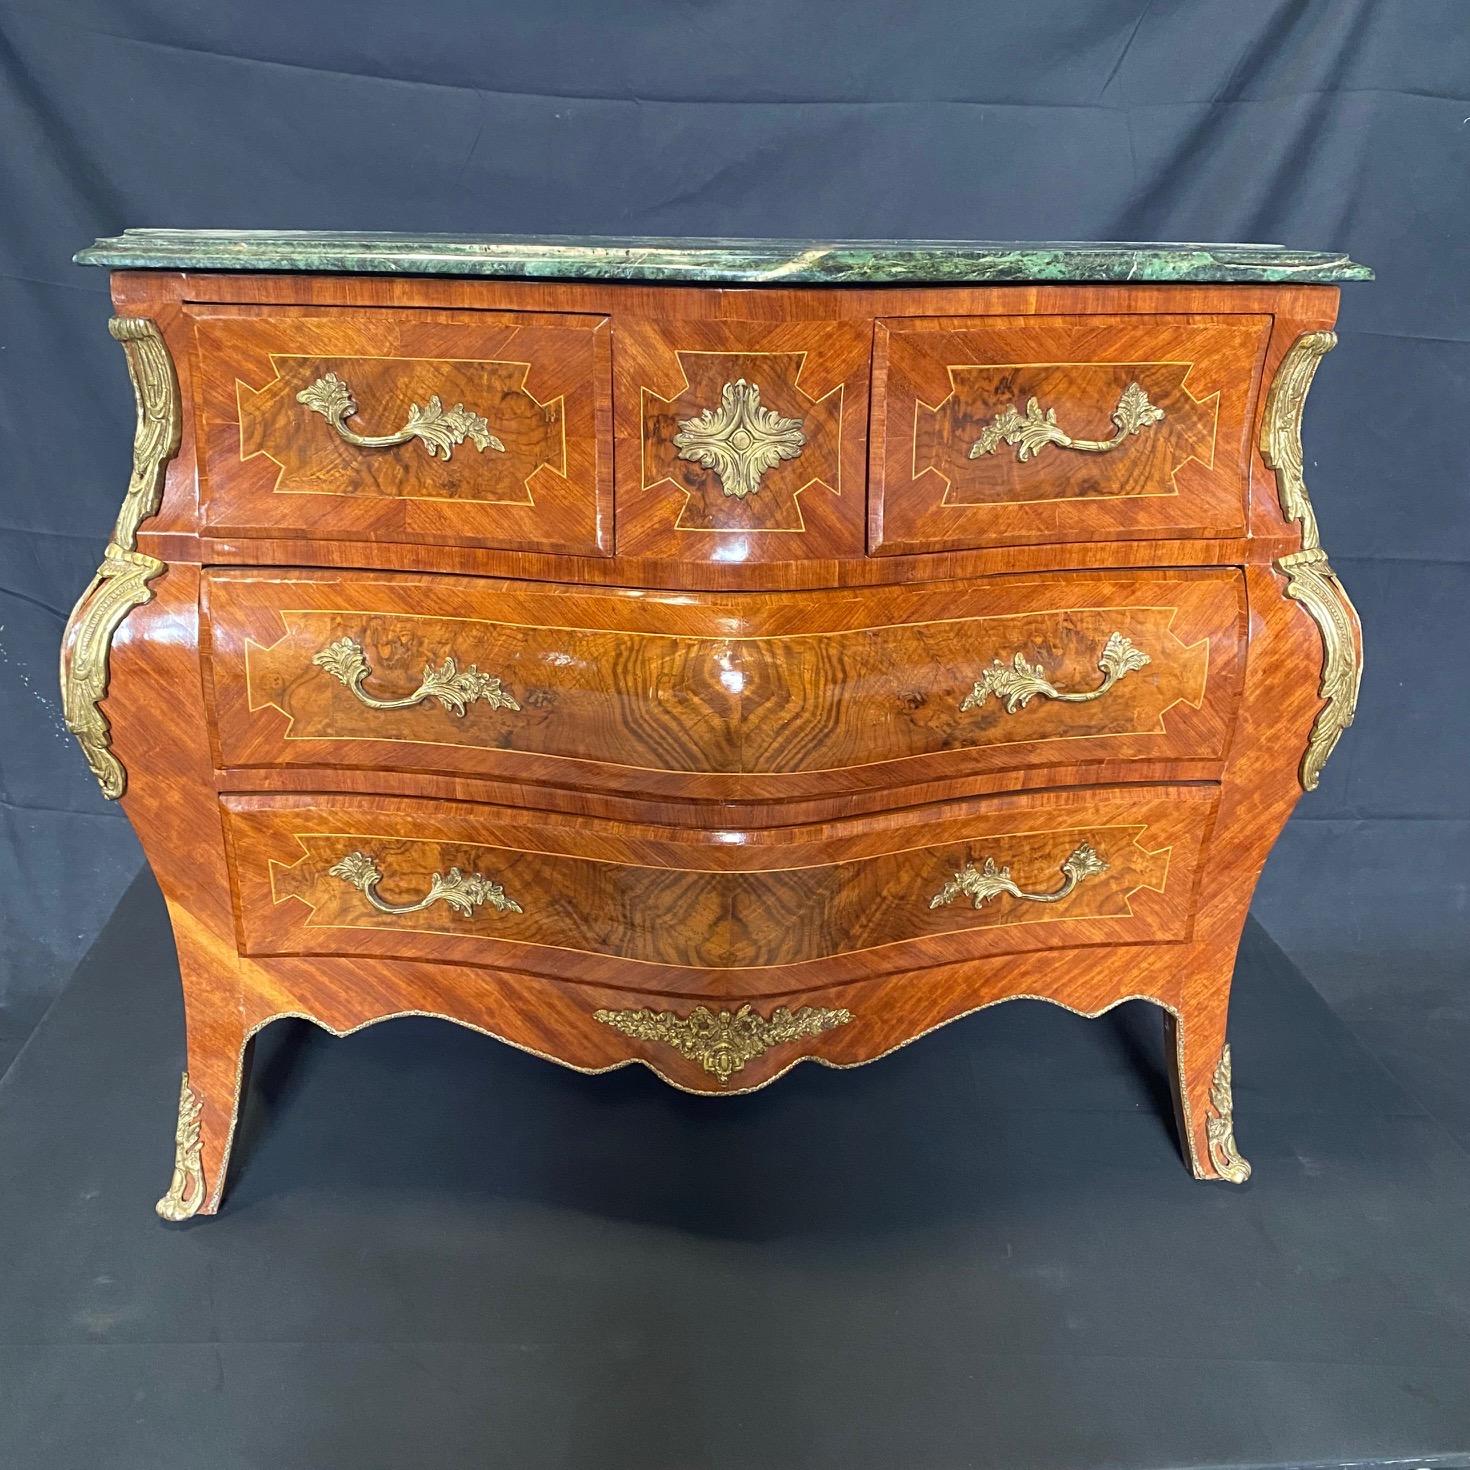 Very high quality French serpentine bombe commode or chest of drawers in Louis XV style with original marble top having really beautiful walnut inlay on drawers and sides and rococo ormolu handles and on the cabriole legs to the sabot feet. 

